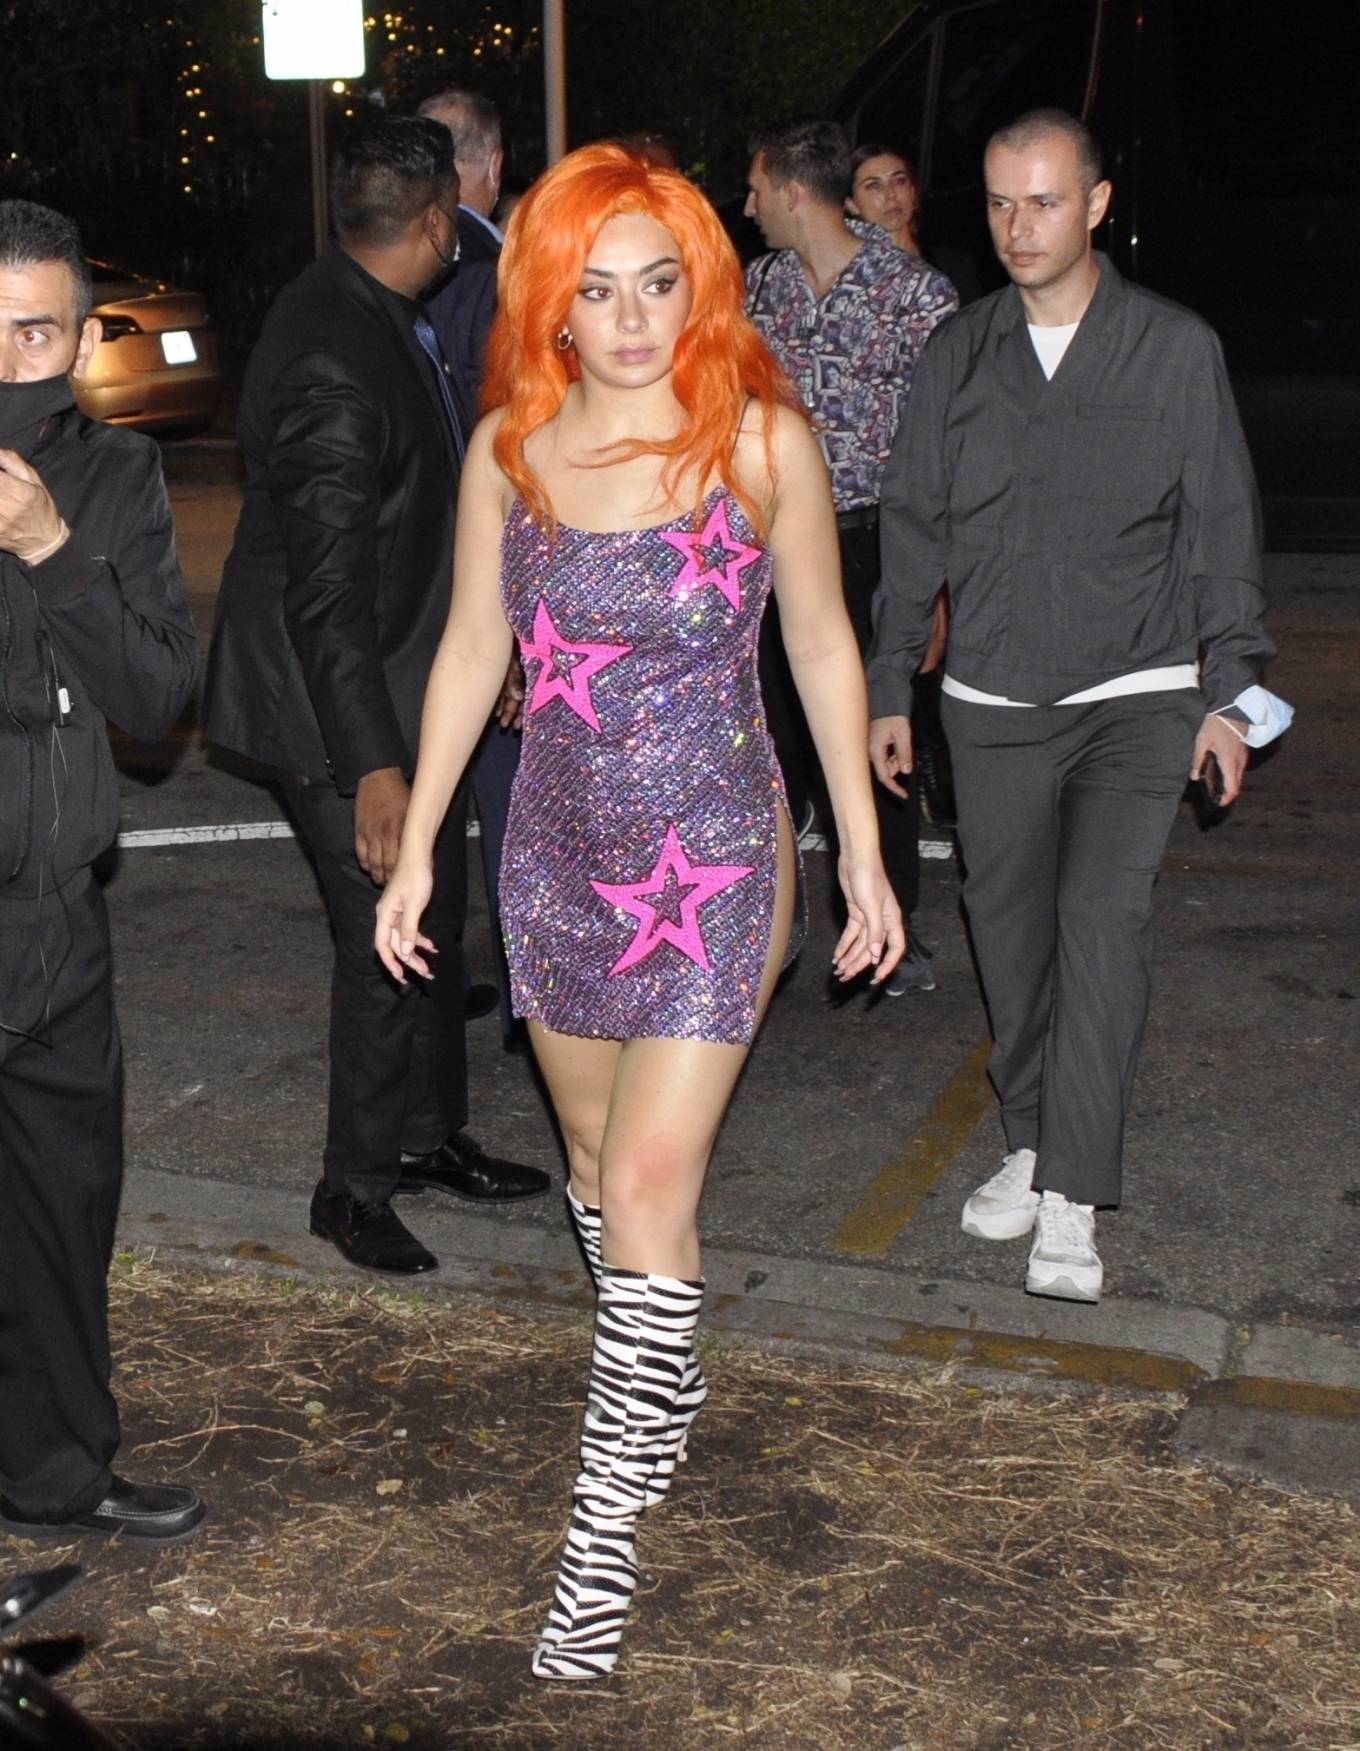 Charli XCX - Wearing a orange wig and knee high zebra pattern boots at Playboy party in Miami Beach